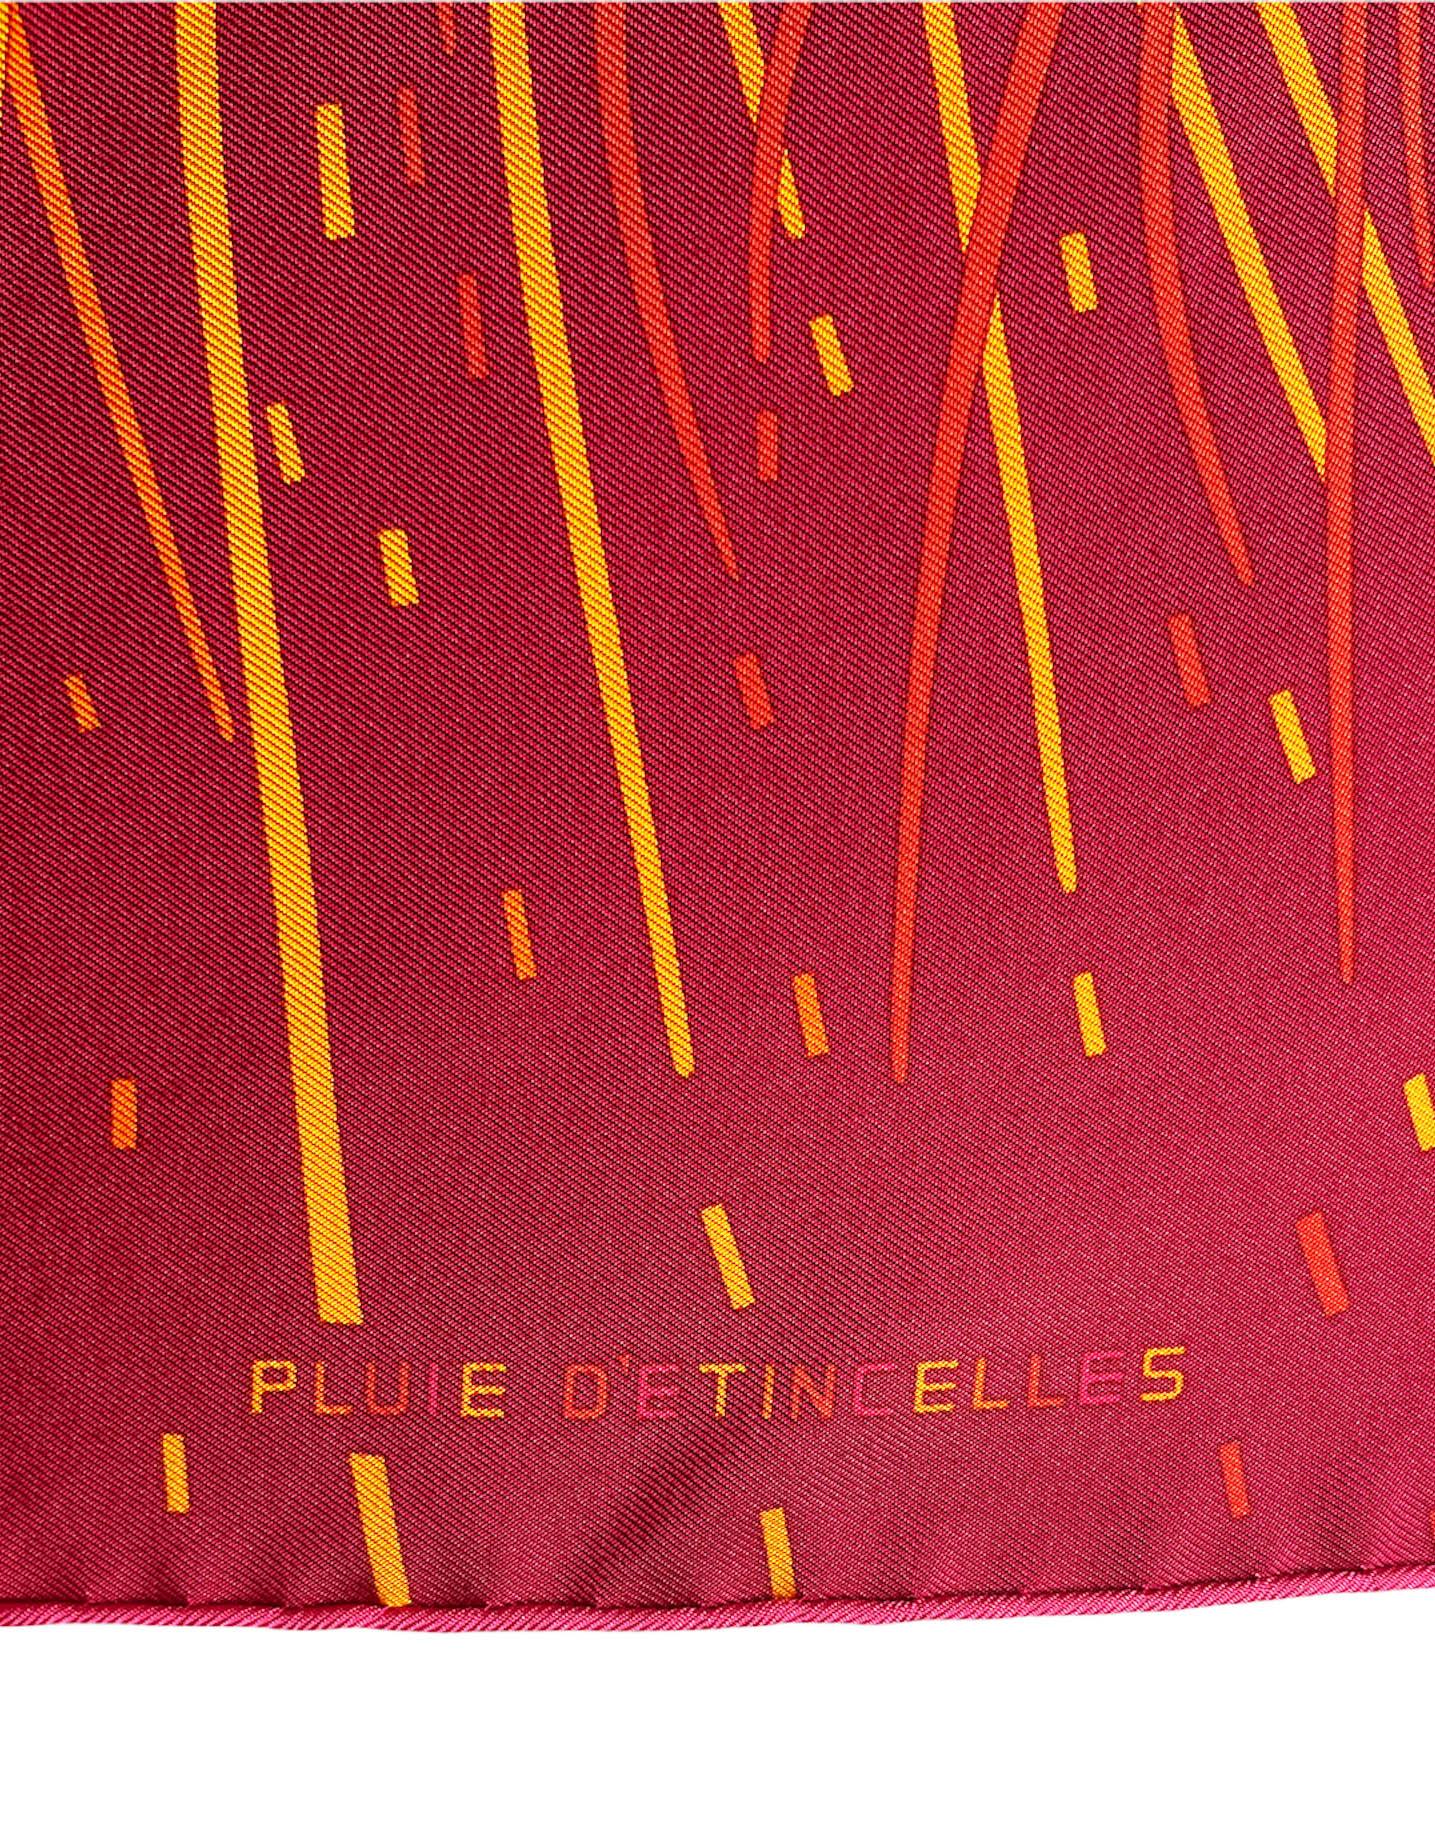 Hermes Pink Silk Pluie D'Etincelles Pocket Square designed by Wlodzimierz Kaminski.  Features firework print.

Made In: France
Color: Fuchsia, orange, yellow
Materials: 100% silk
Overall Condition: Excellent
Measurements: 16.5